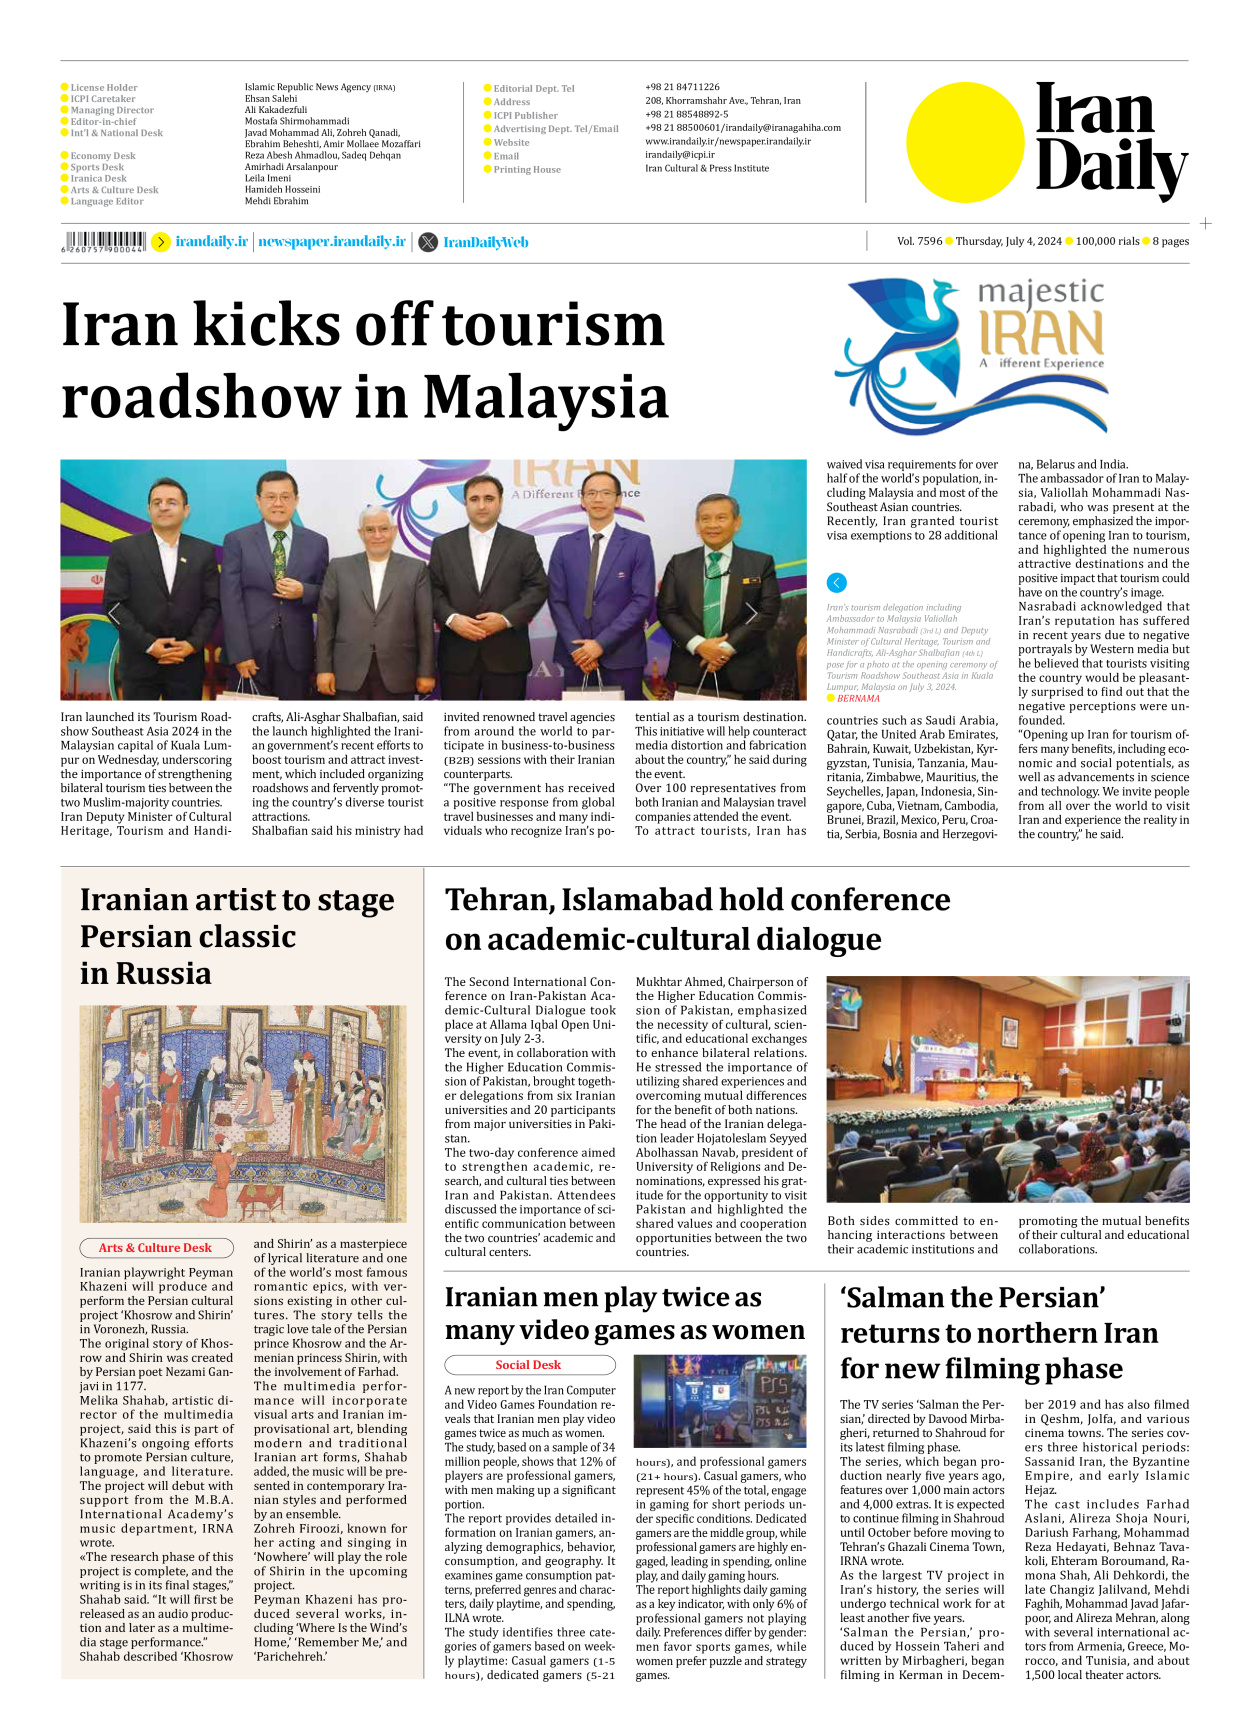 Iran Daily - Number Seven Thousand Five Hundred and Ninety Six - 04 July 2024 - Page 8